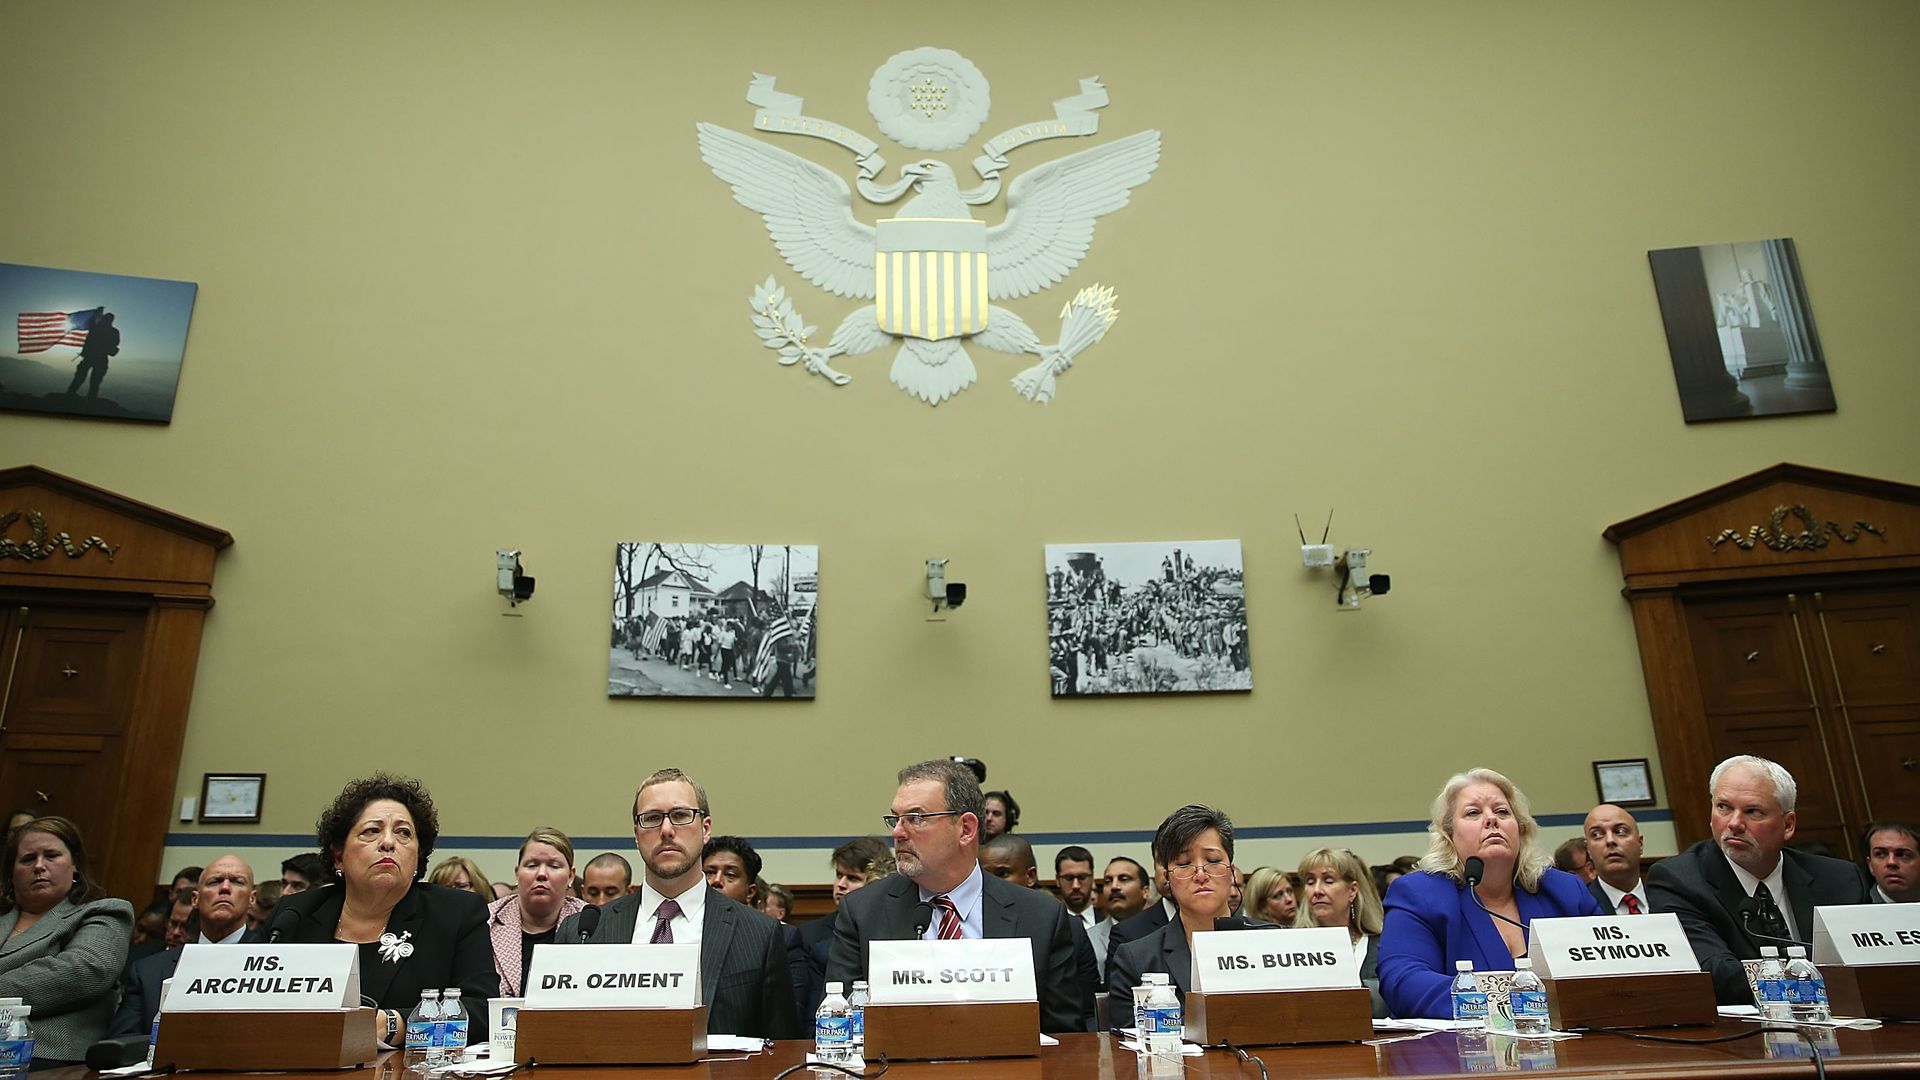 The OPM breach hearings in 2015